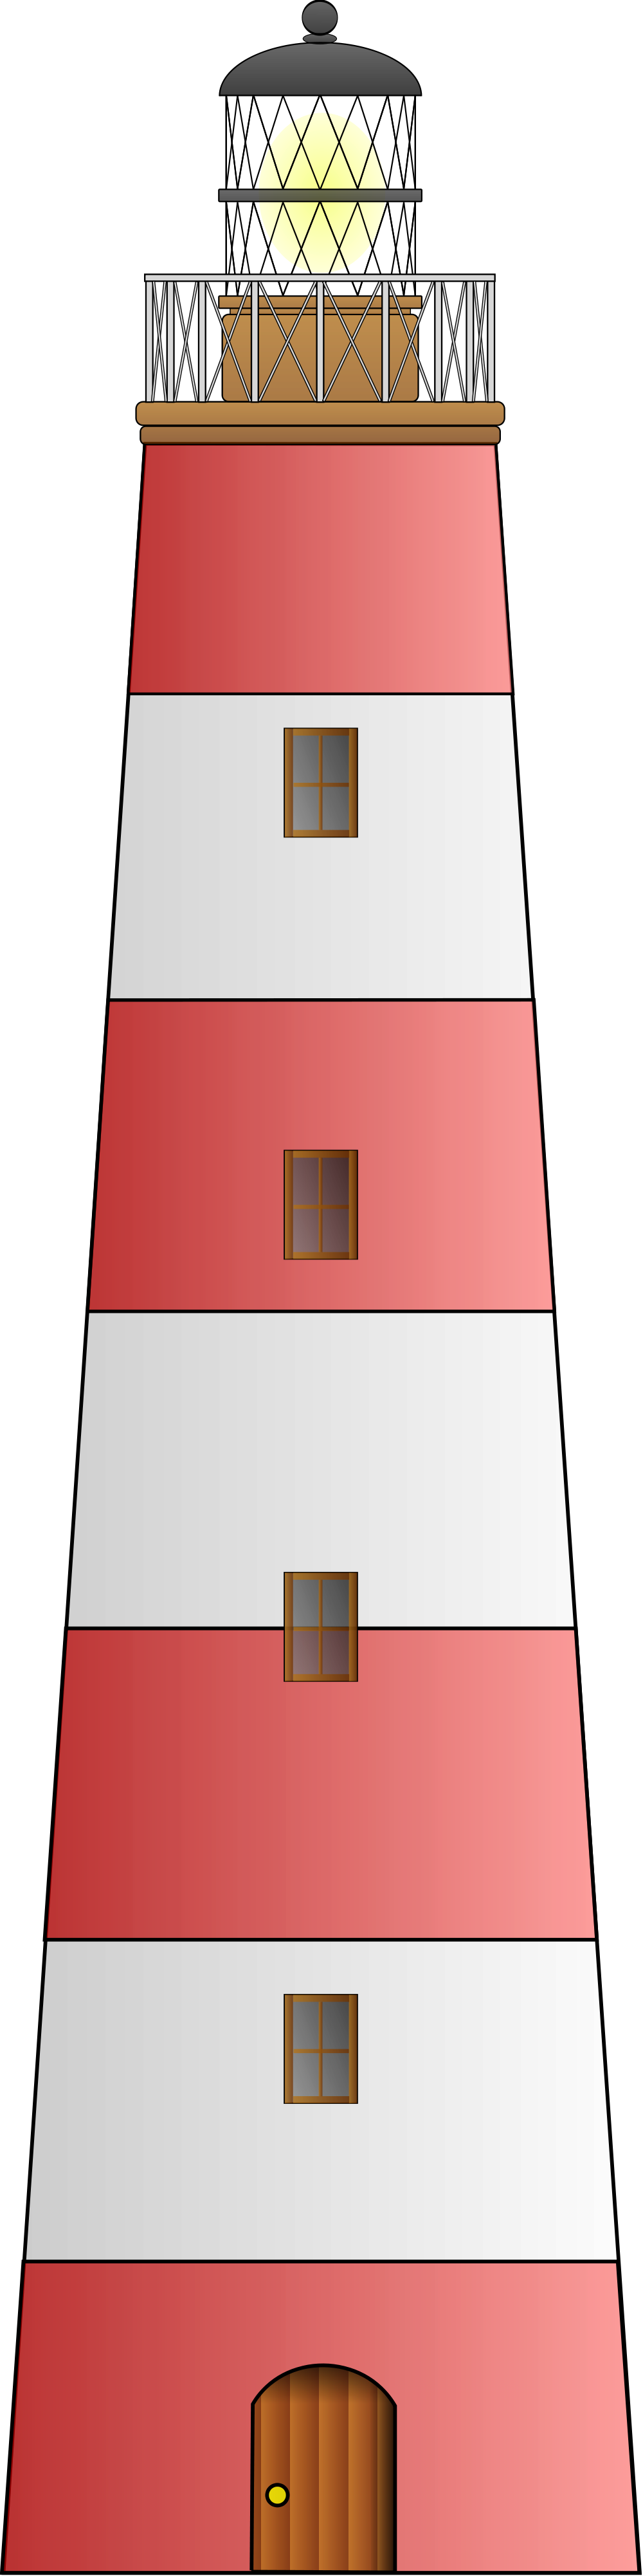 Lighthouse clipart pink. File svg wikimedia commons